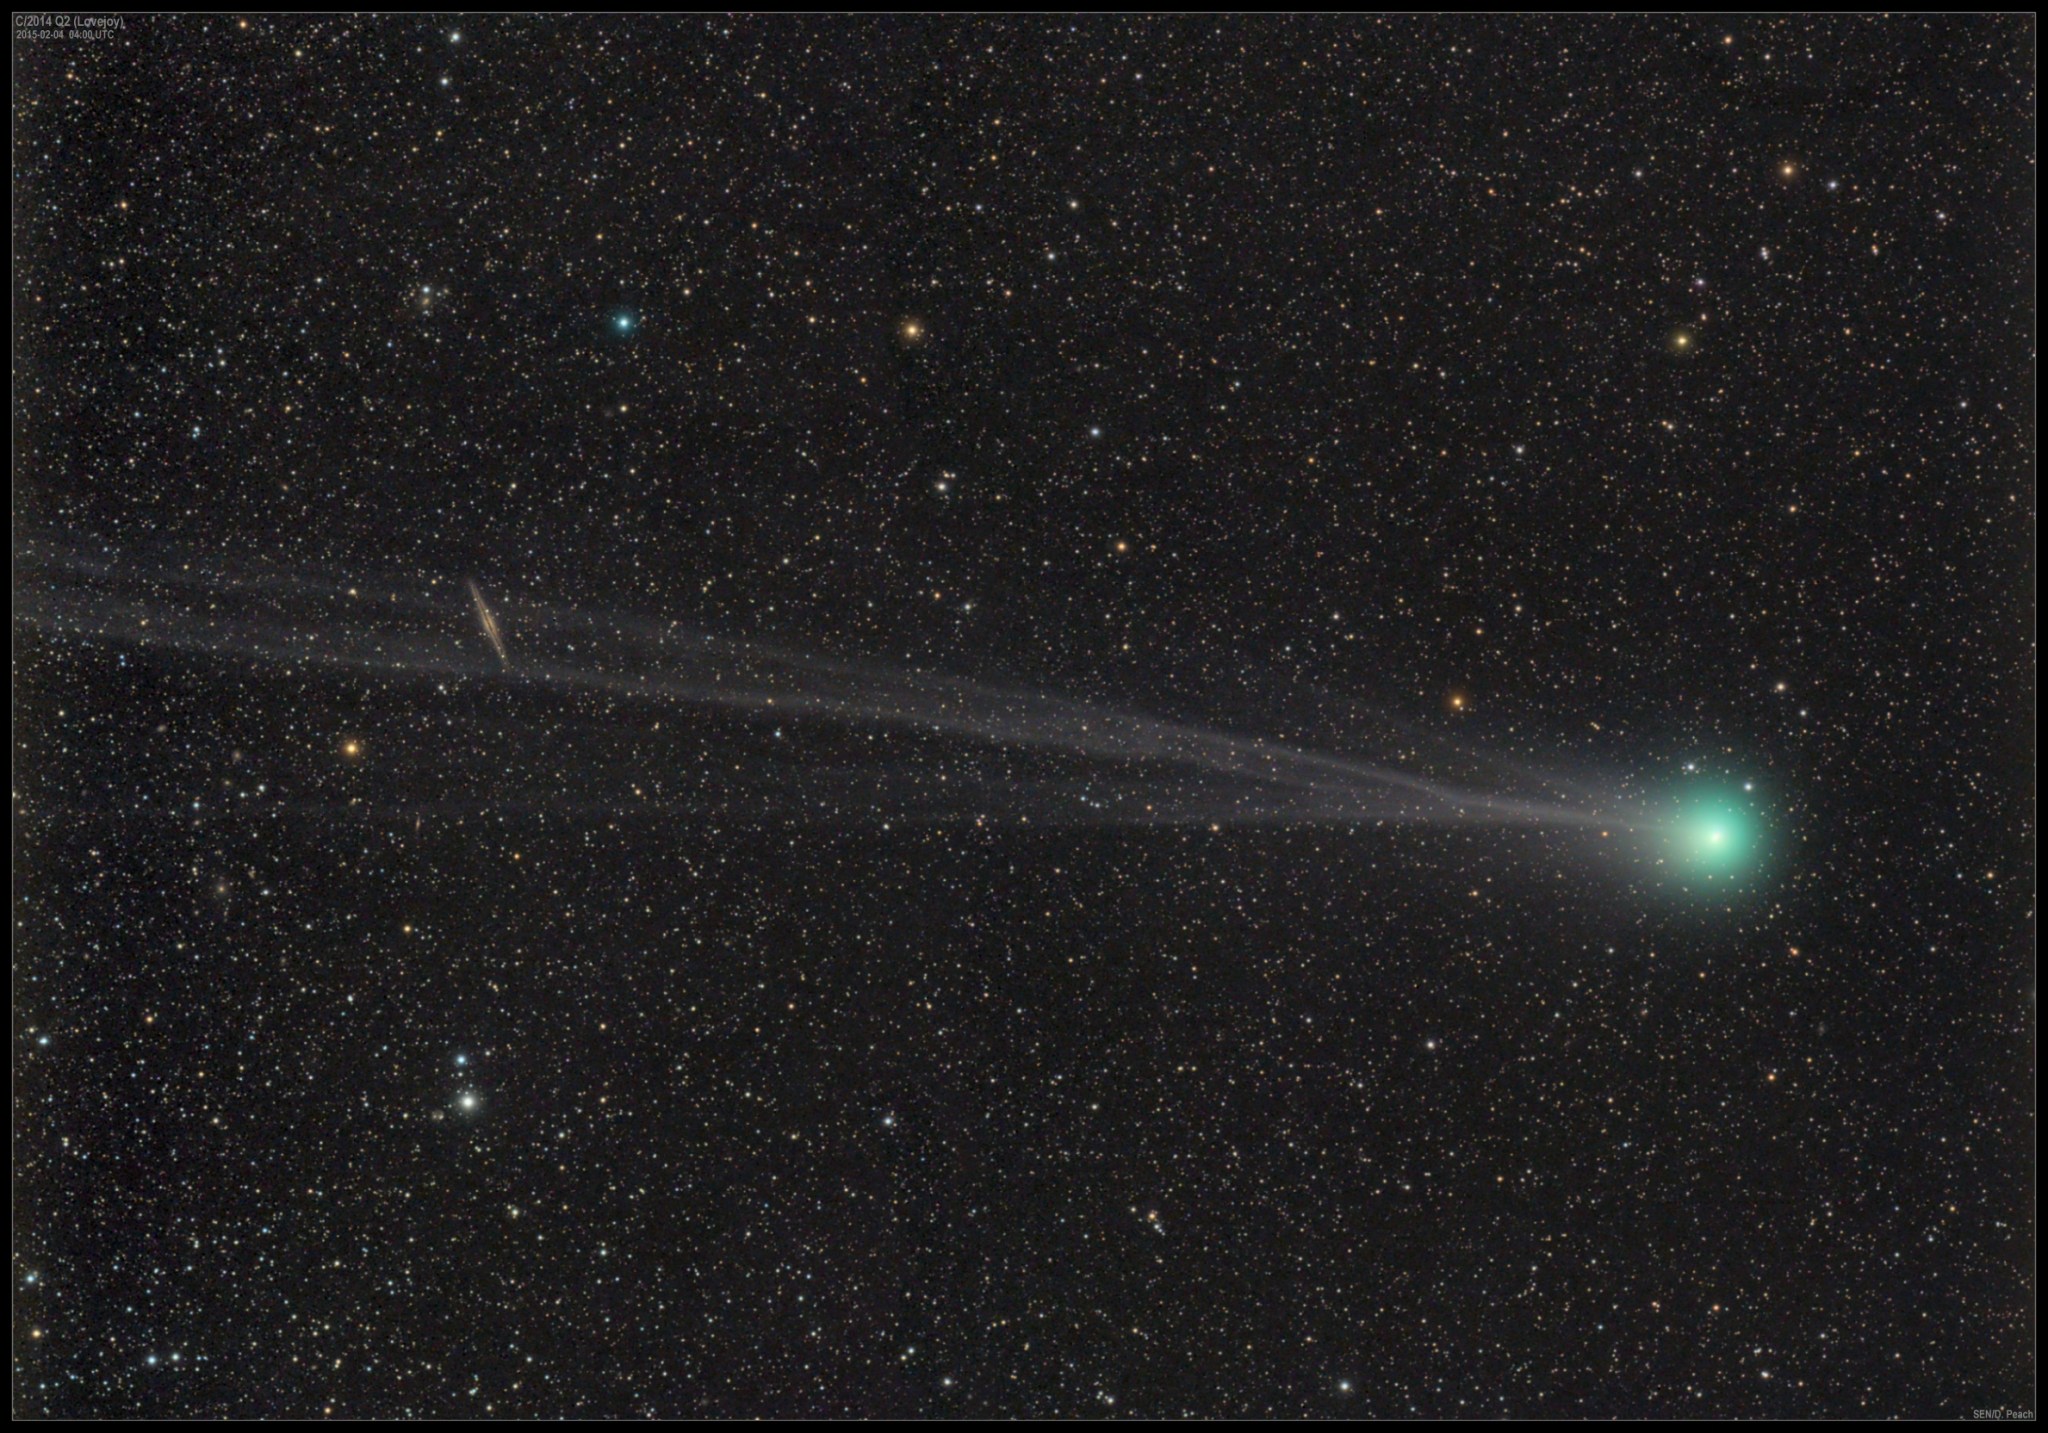 greenish comet against stars with galaxy in tail